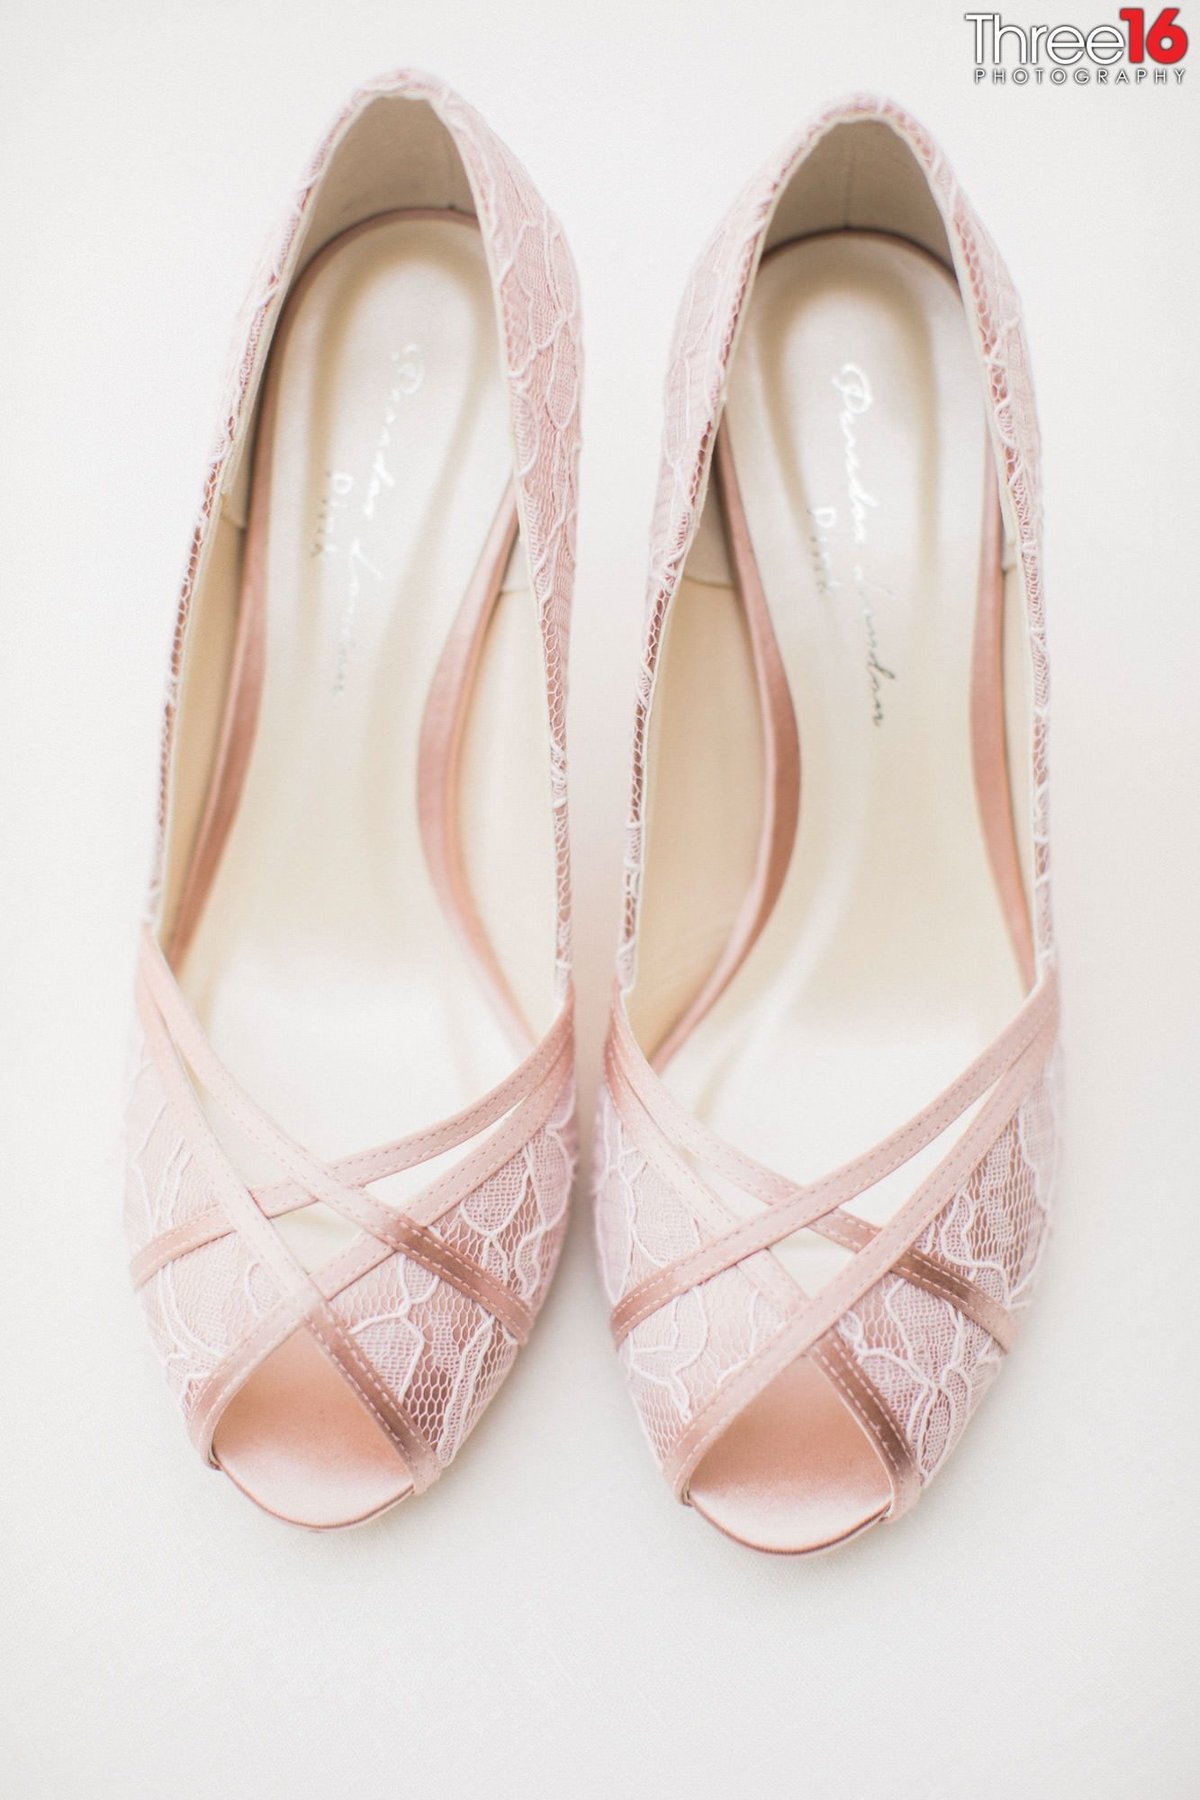 Wedding day shoes for the Bride